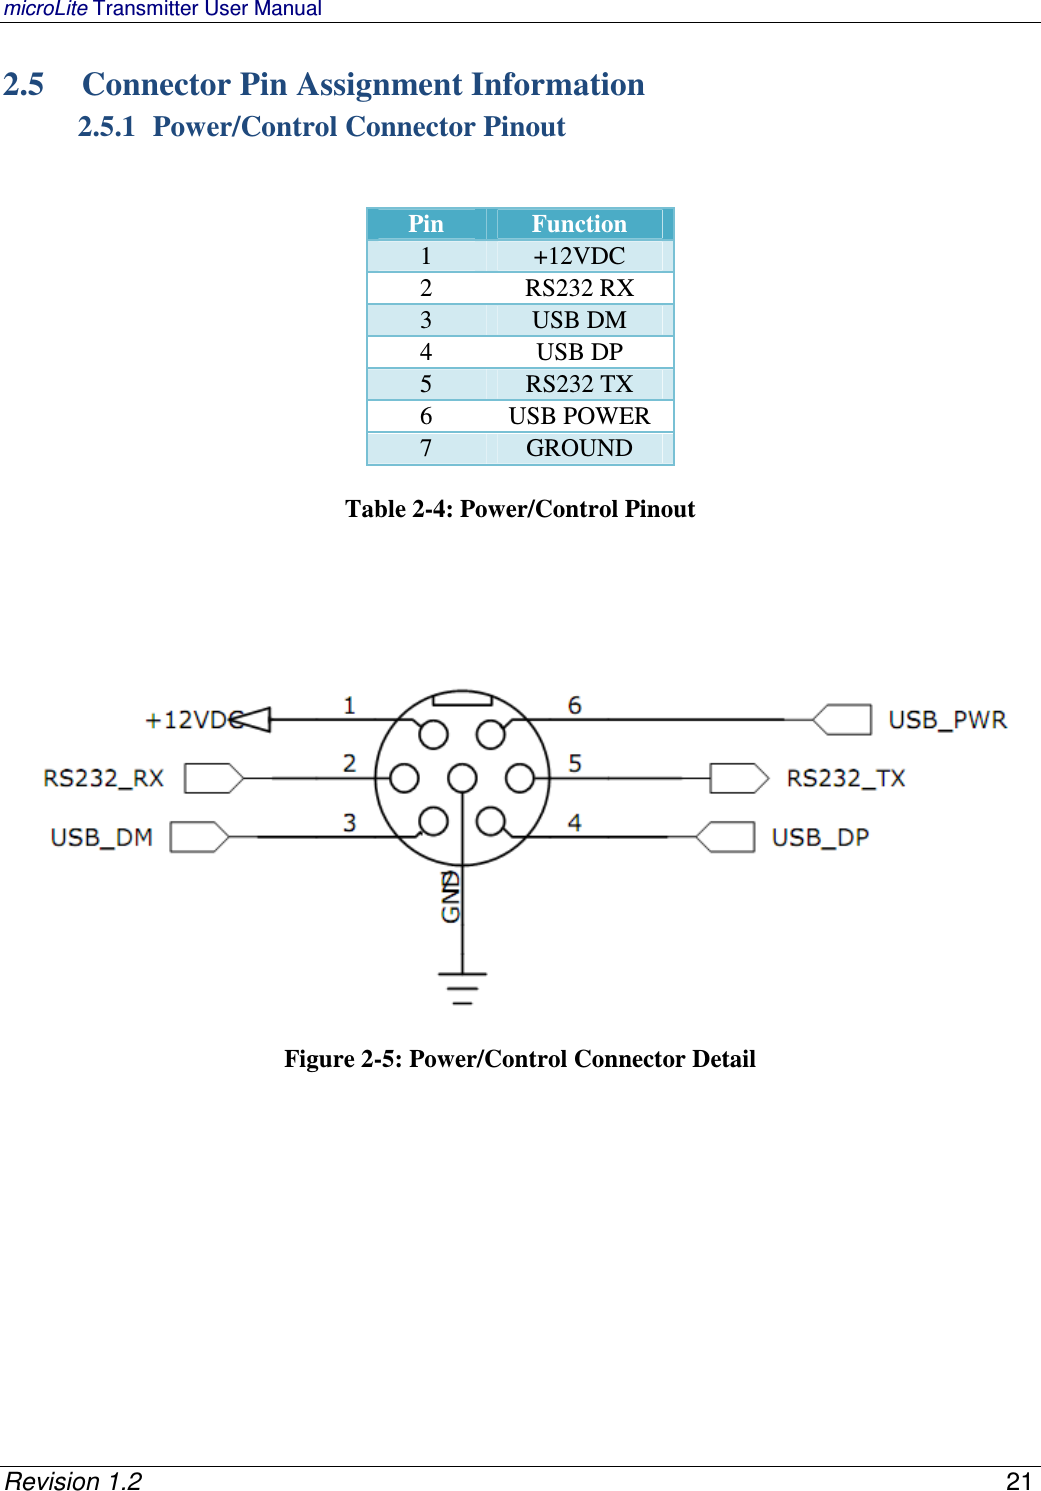 microLite Transmitter User Manual   Revision 1.2    21 2.5 Connector Pin Assignment Information 2.5.1 Power/Control Connector Pinout   Pin  Function 1 +12VDC 2 RS232 RX 3 USB DM 4 USB DP 5 RS232 TX 6 USB POWER 7 GROUND  Table 2-4: Power/Control Pinout        Figure 2-5: Power/Control Connector Detail  